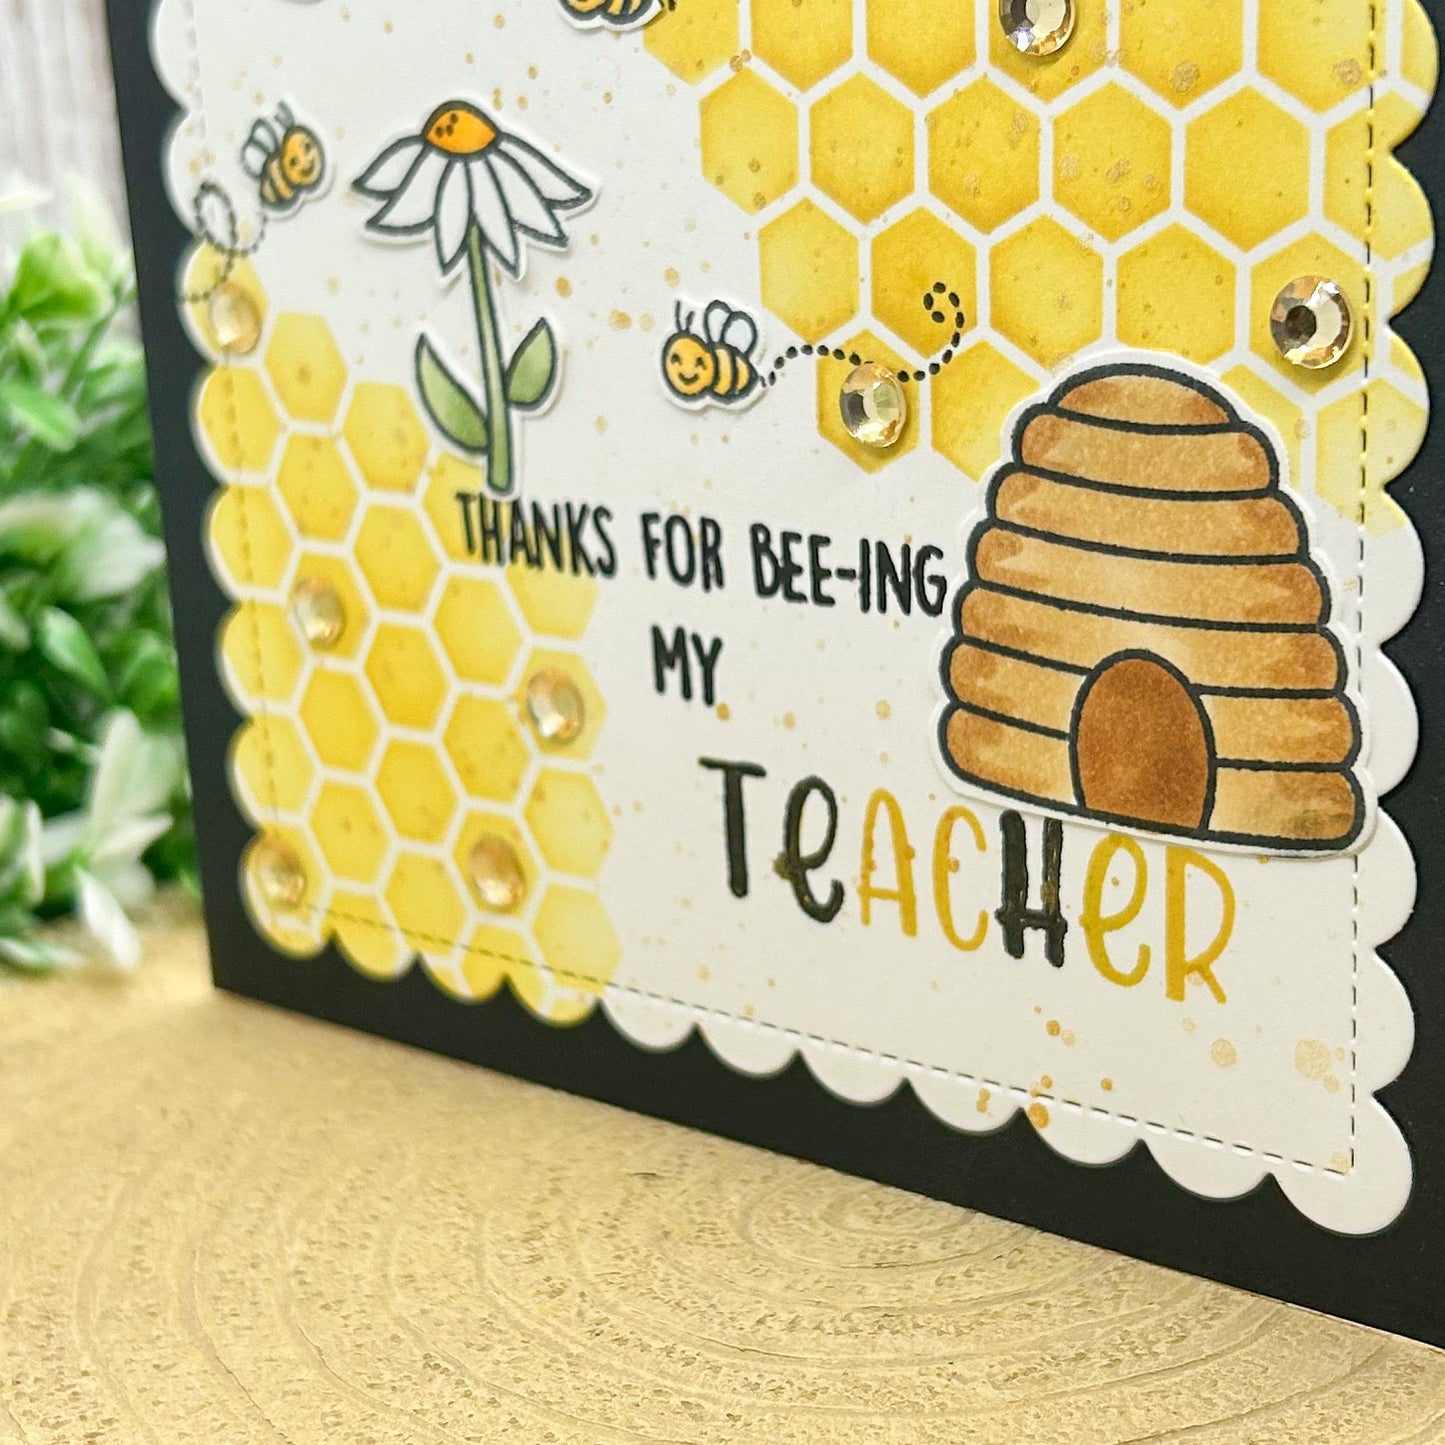 Thanks For BEE-ing My Teacher Square Handmade Thank You Card-2